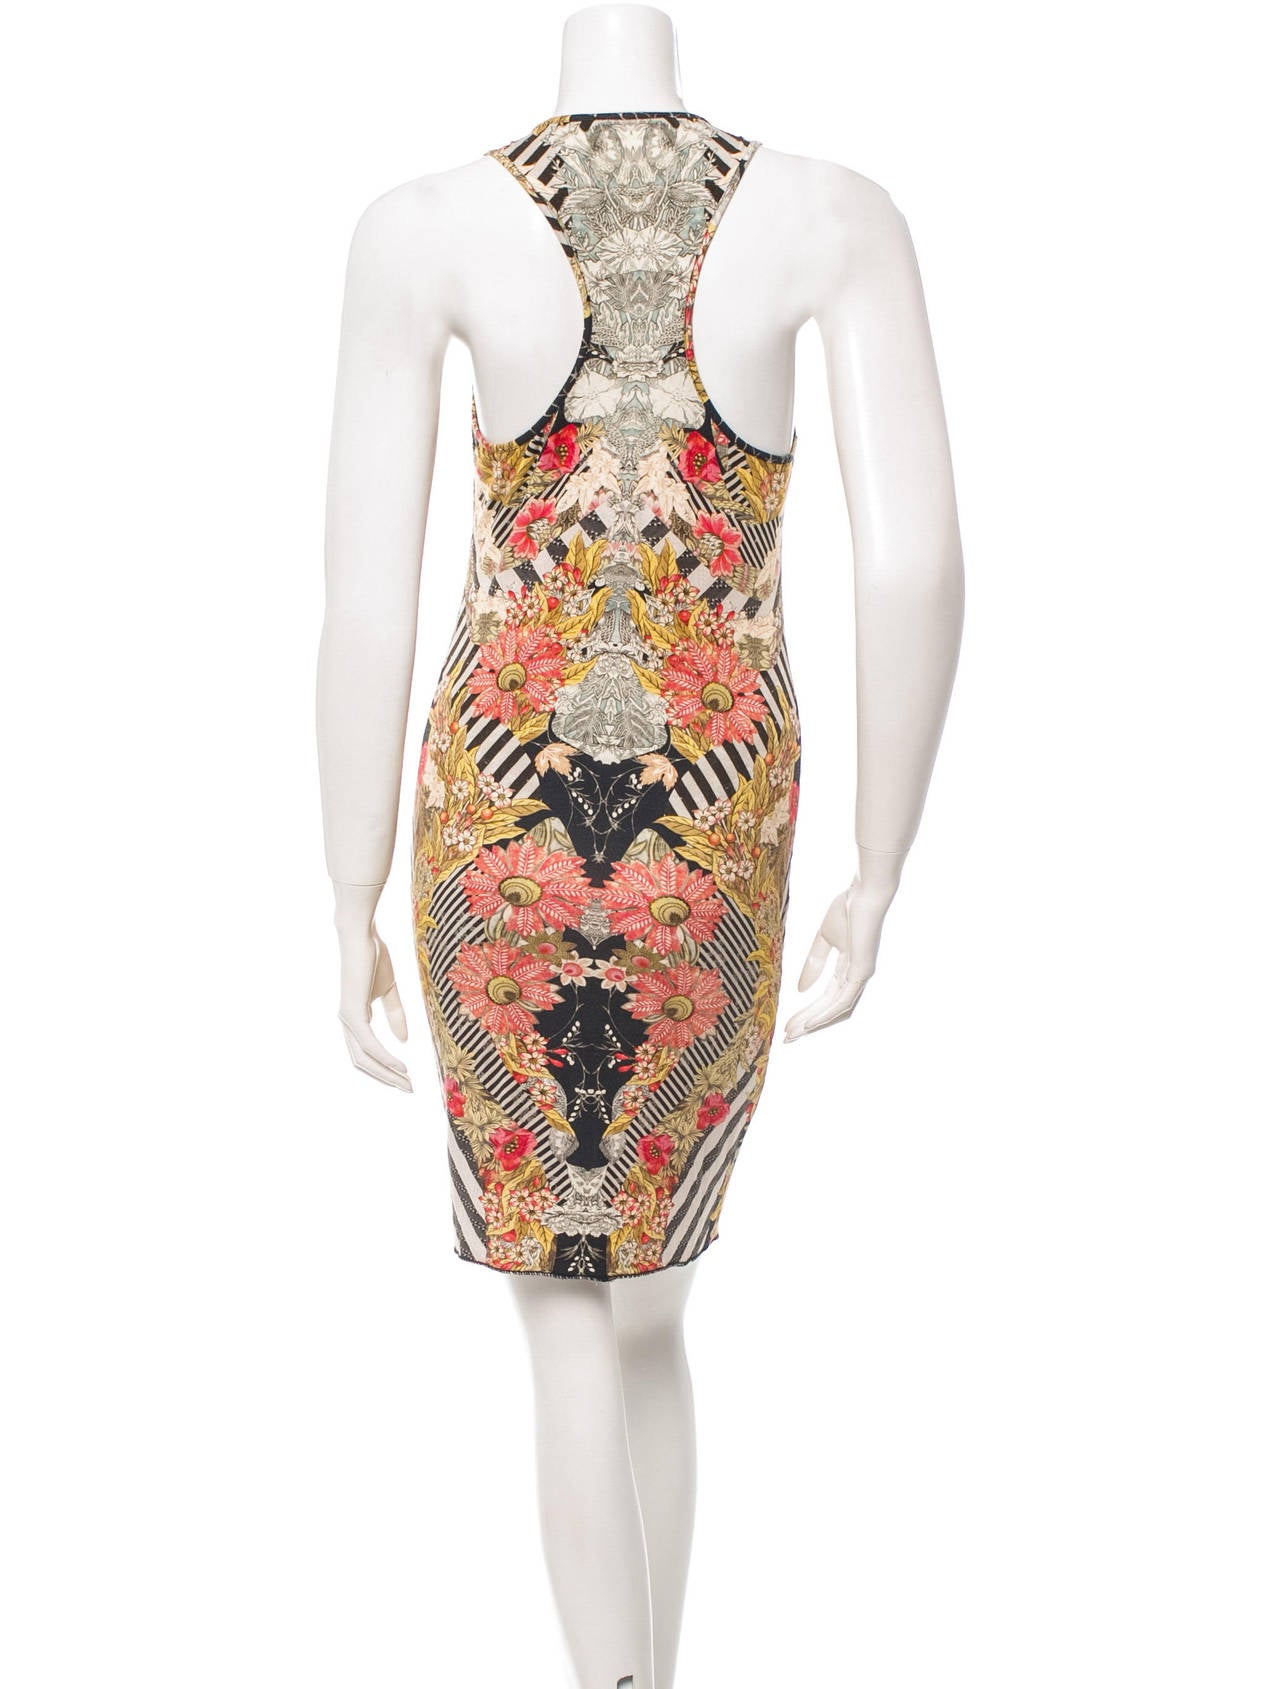 Alexander McQueen Harvest Print Dress, SS 2011 In Good Condition For Sale In Bethesda, MD